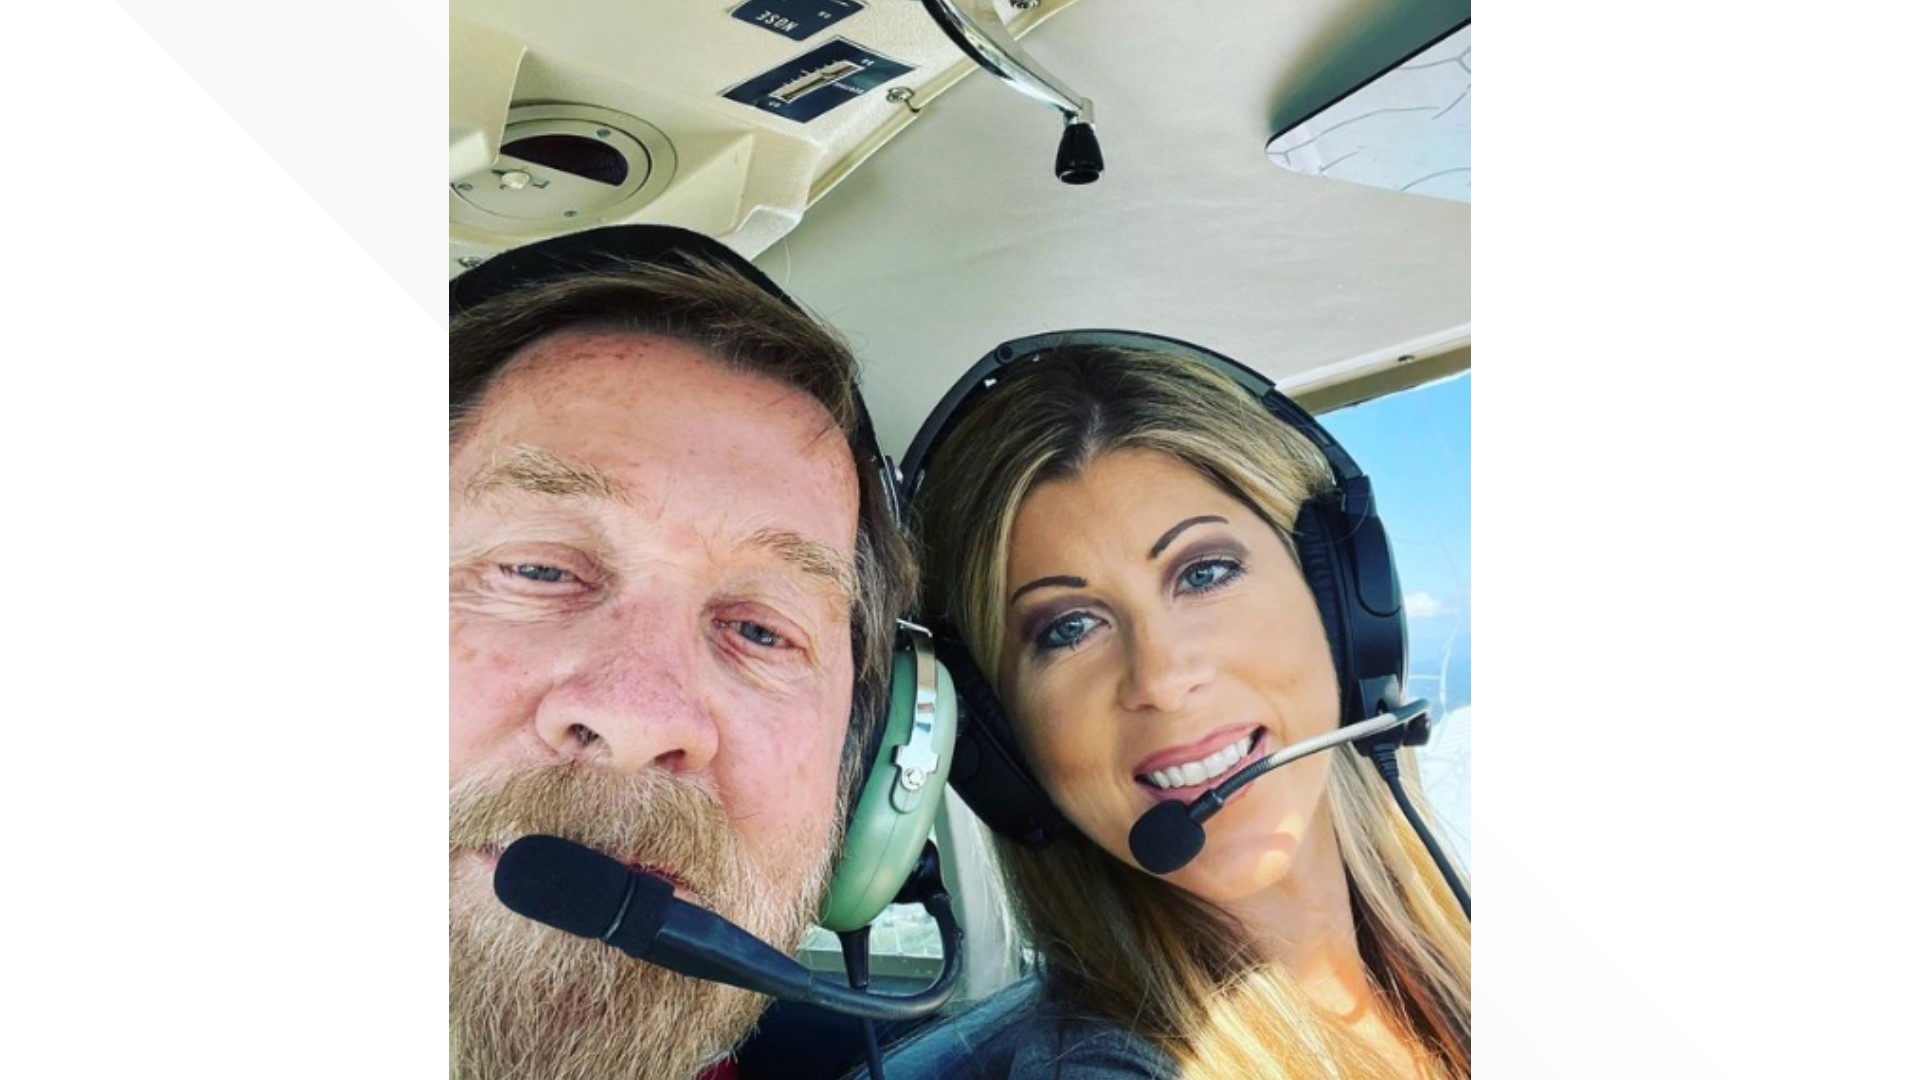 Jenny Blalock and her father James Blalock died in the small plane crash near Pulaski. Jenny was from Knoxville and ran an aviation YouTube channel, TNFlygirl.